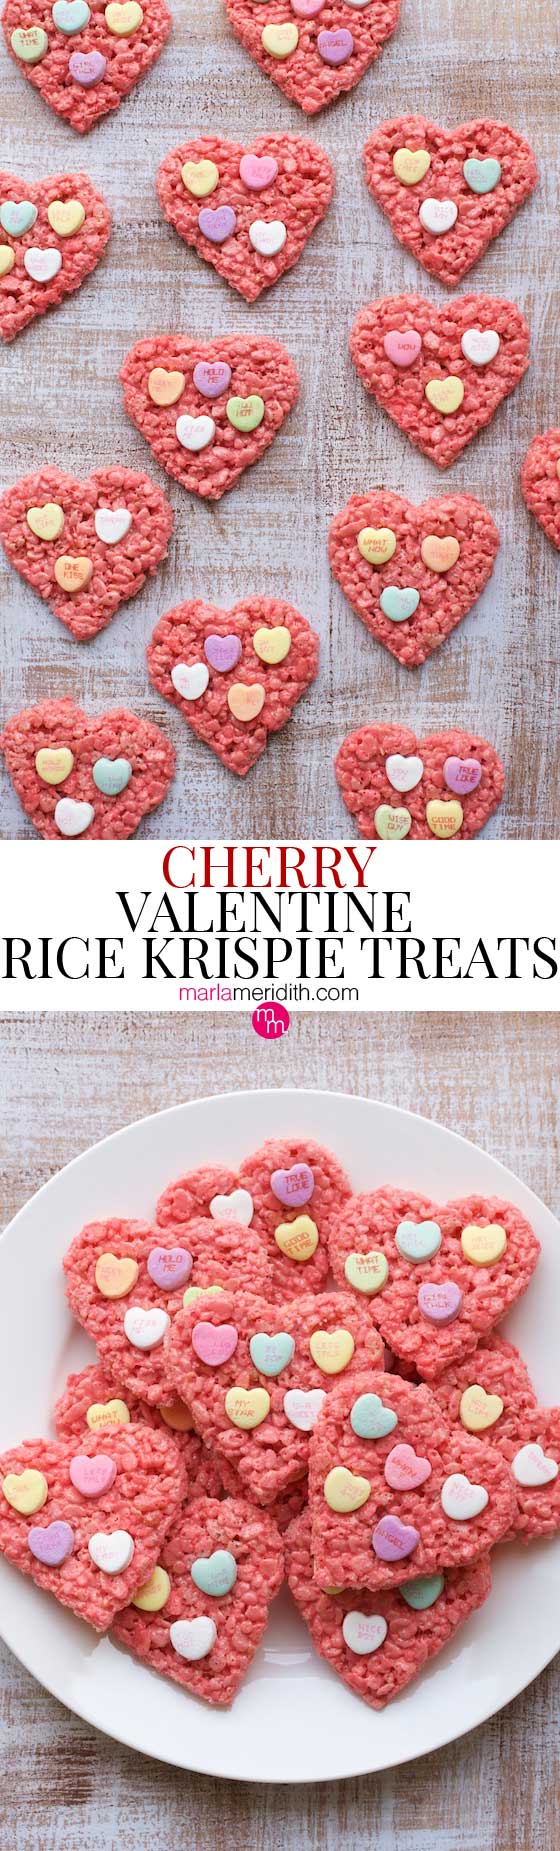 Make these Cherry Rice Krispie Treats for Valentine's Day! MarlaMeridith.com #hearts #valentinesday #recipe